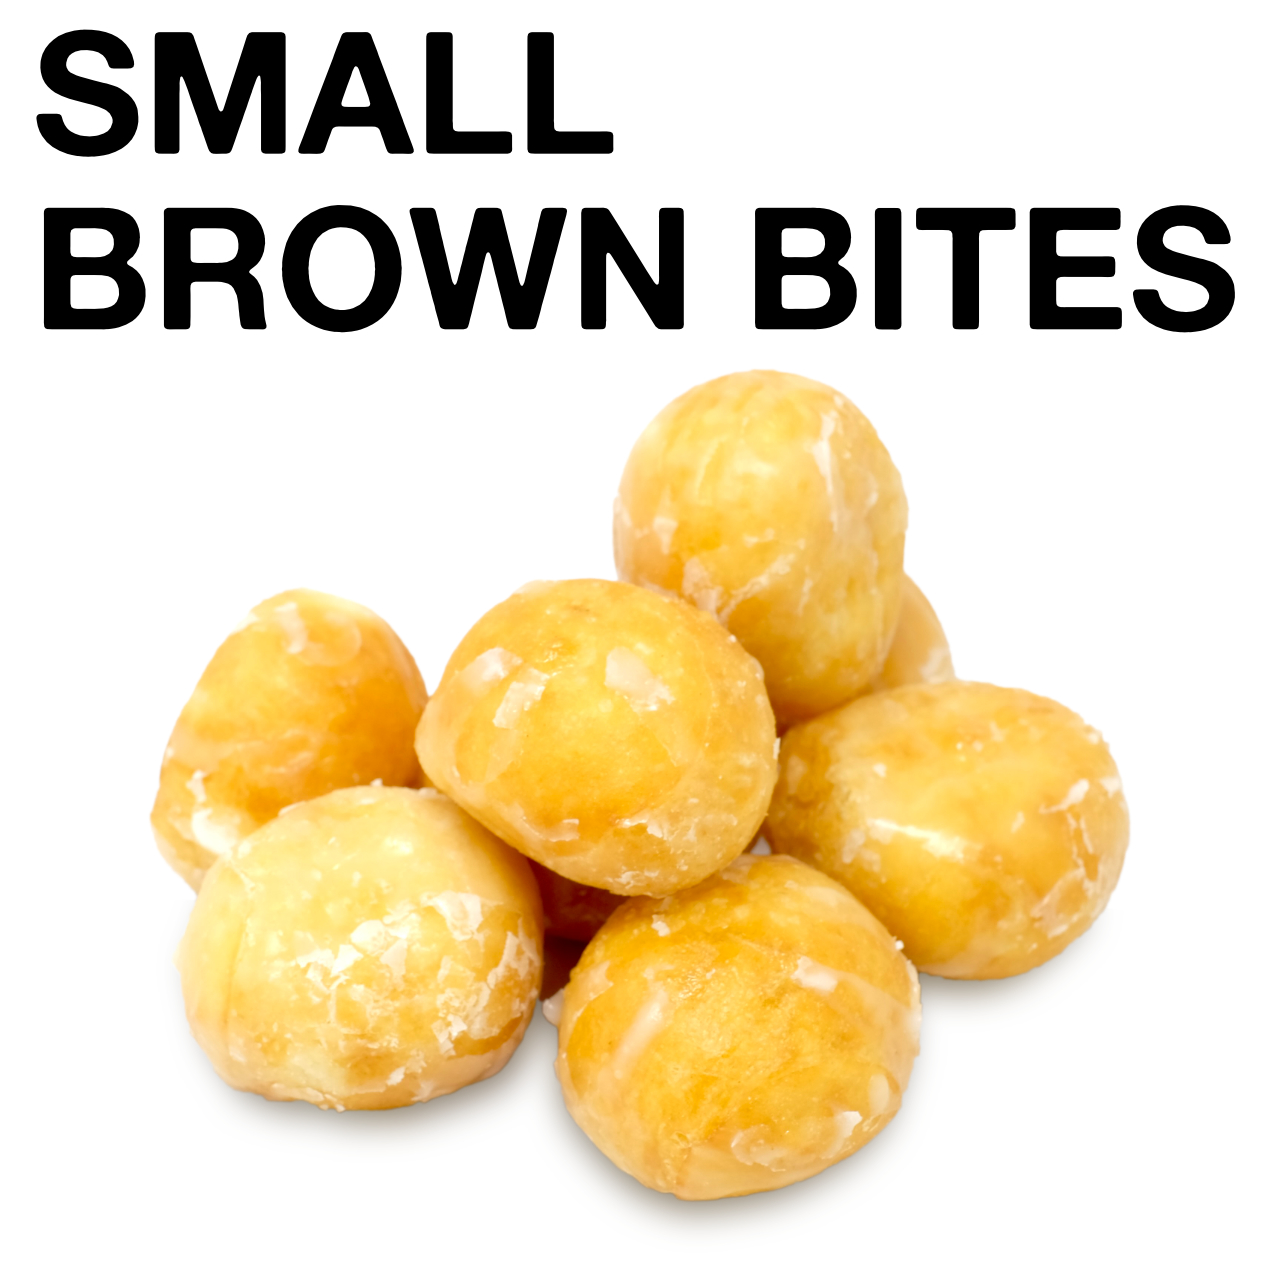 Small Brown Bites